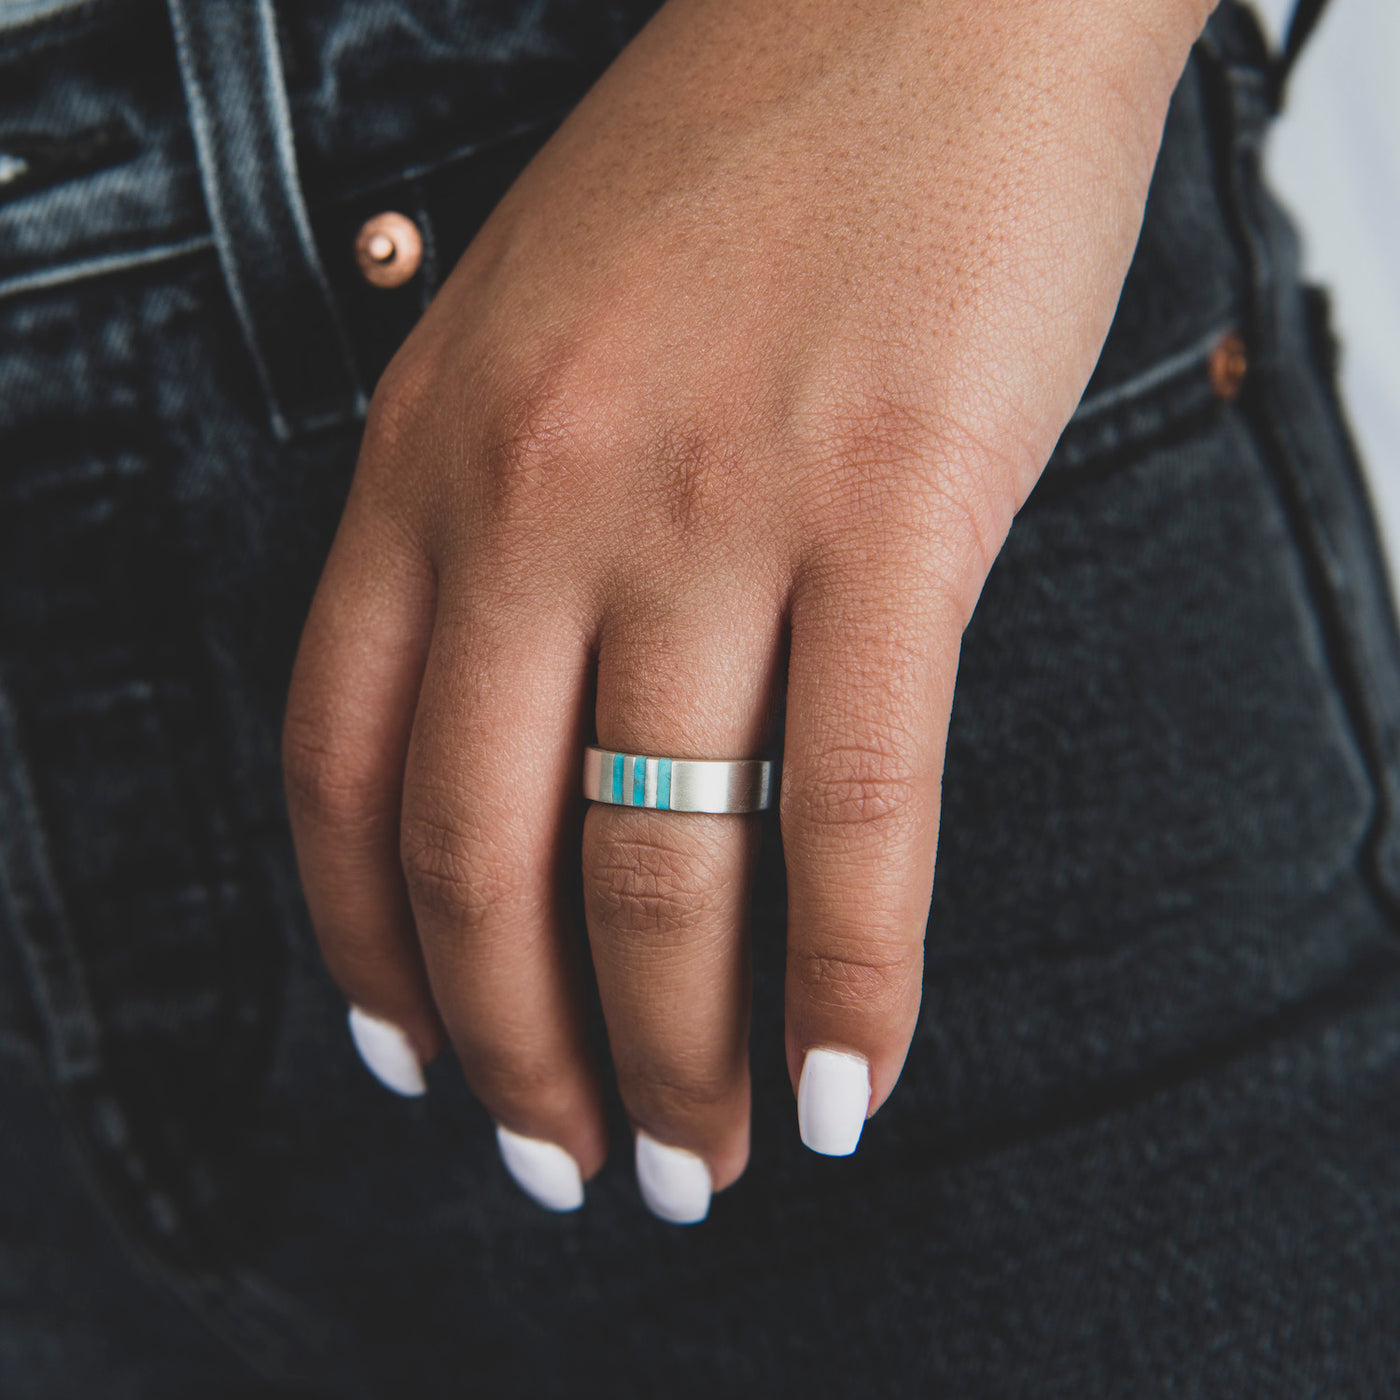 Turquoise Wedding Band Ring | T.Skies Jewelry